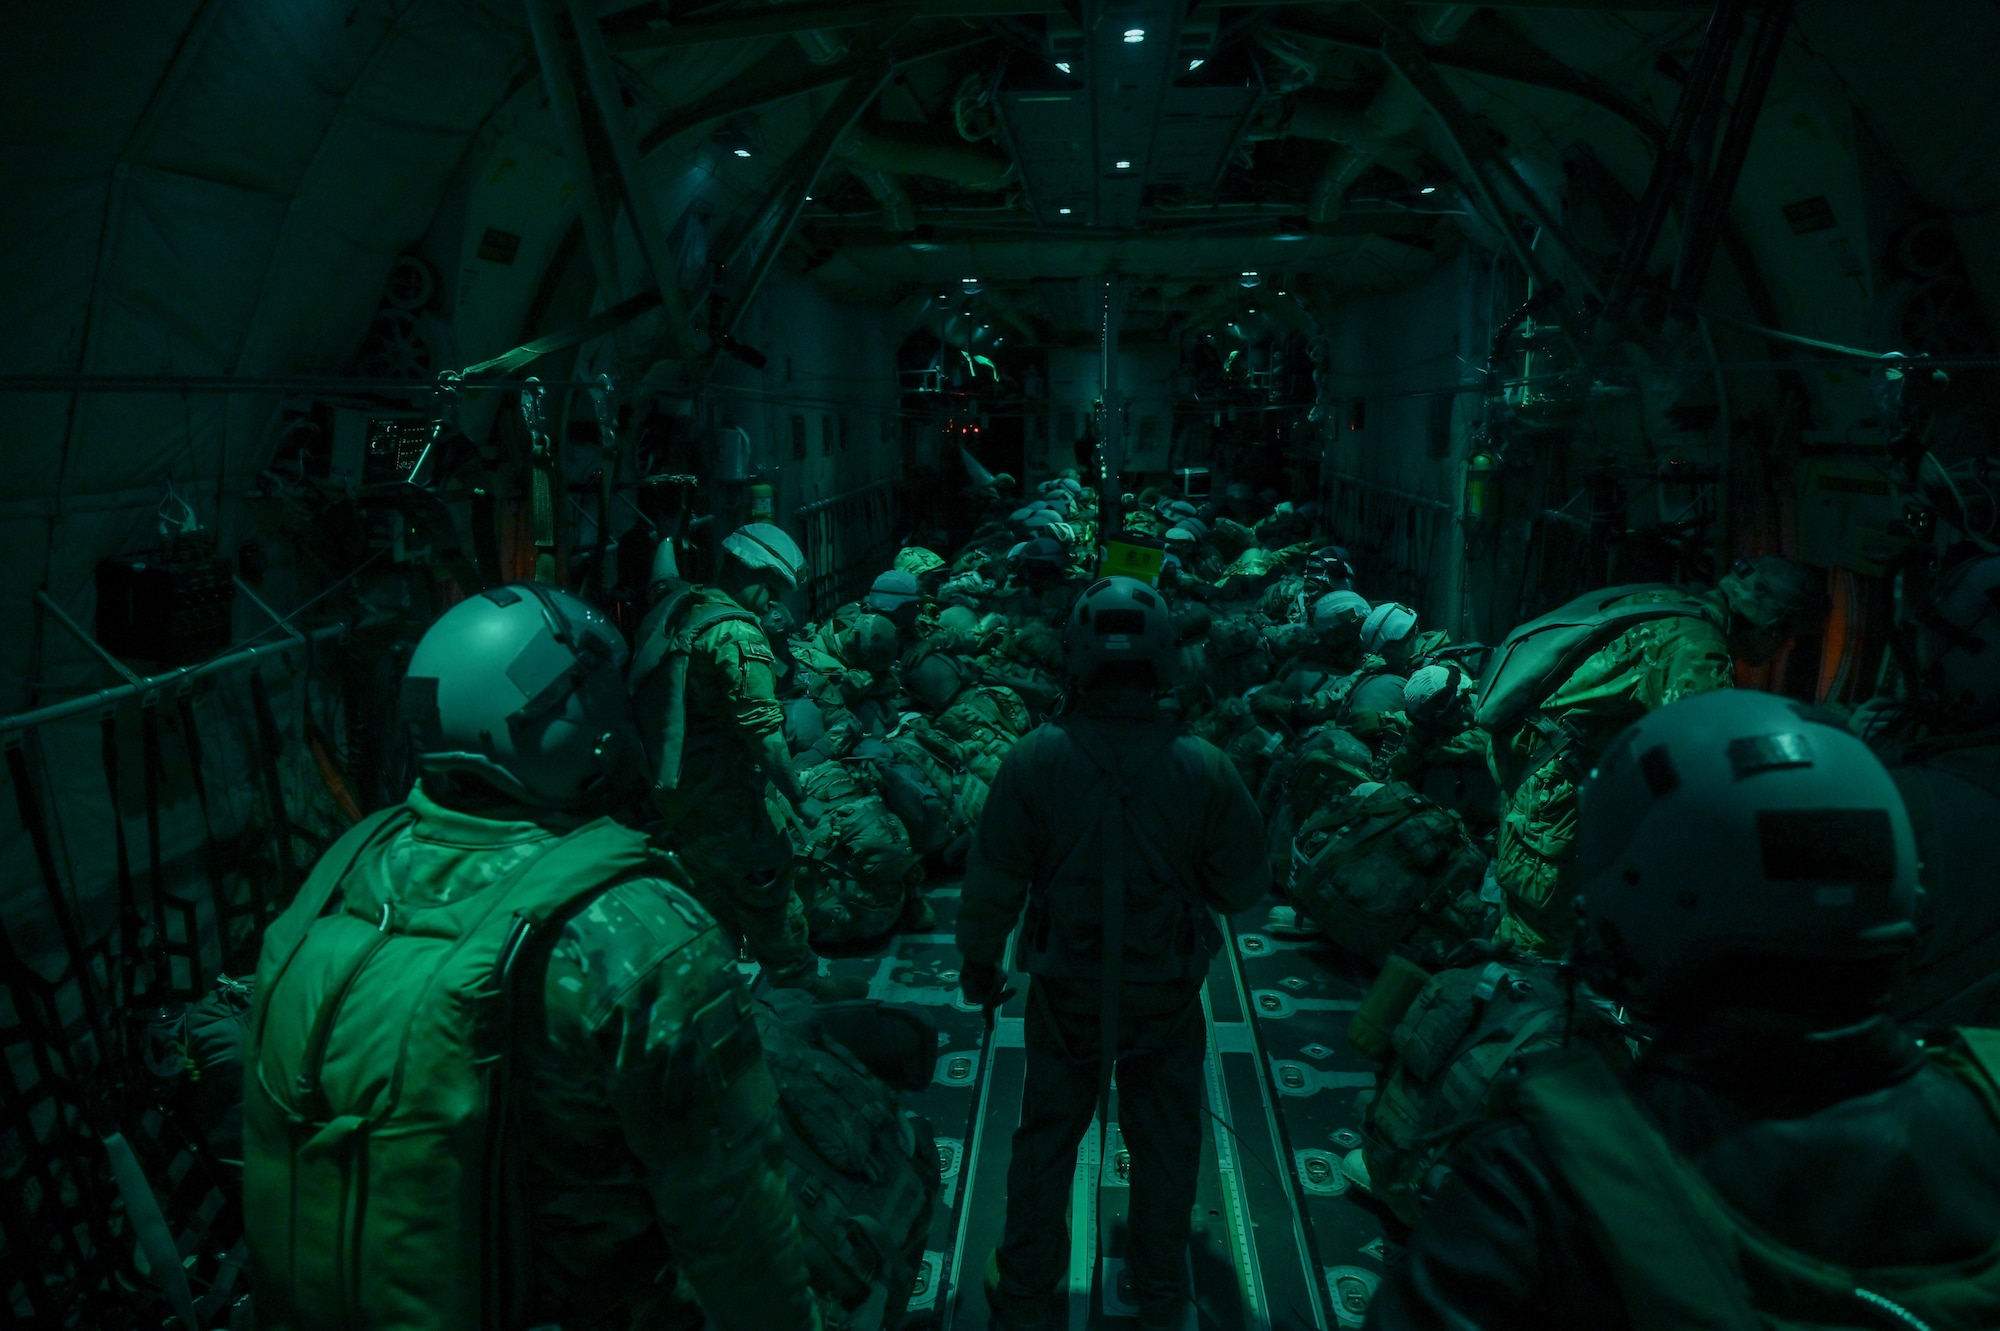 Three men in flight suits standing facing the men sitting down in a c130j aircraft. the room is dark green.